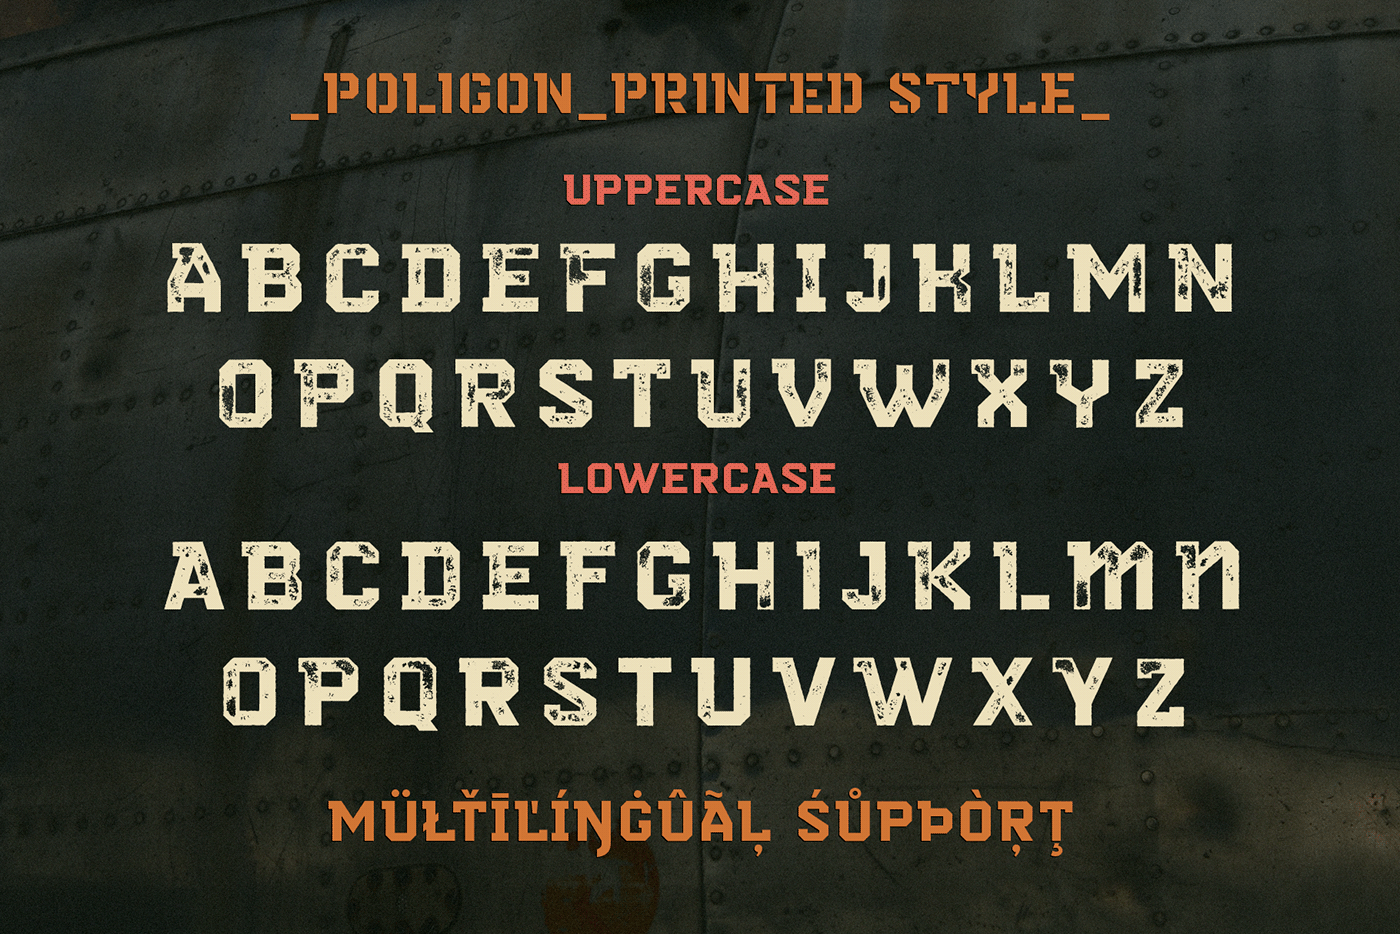 military font stencil vintage font military design soldier Brand Design Advertising  marketing   army font military fashion